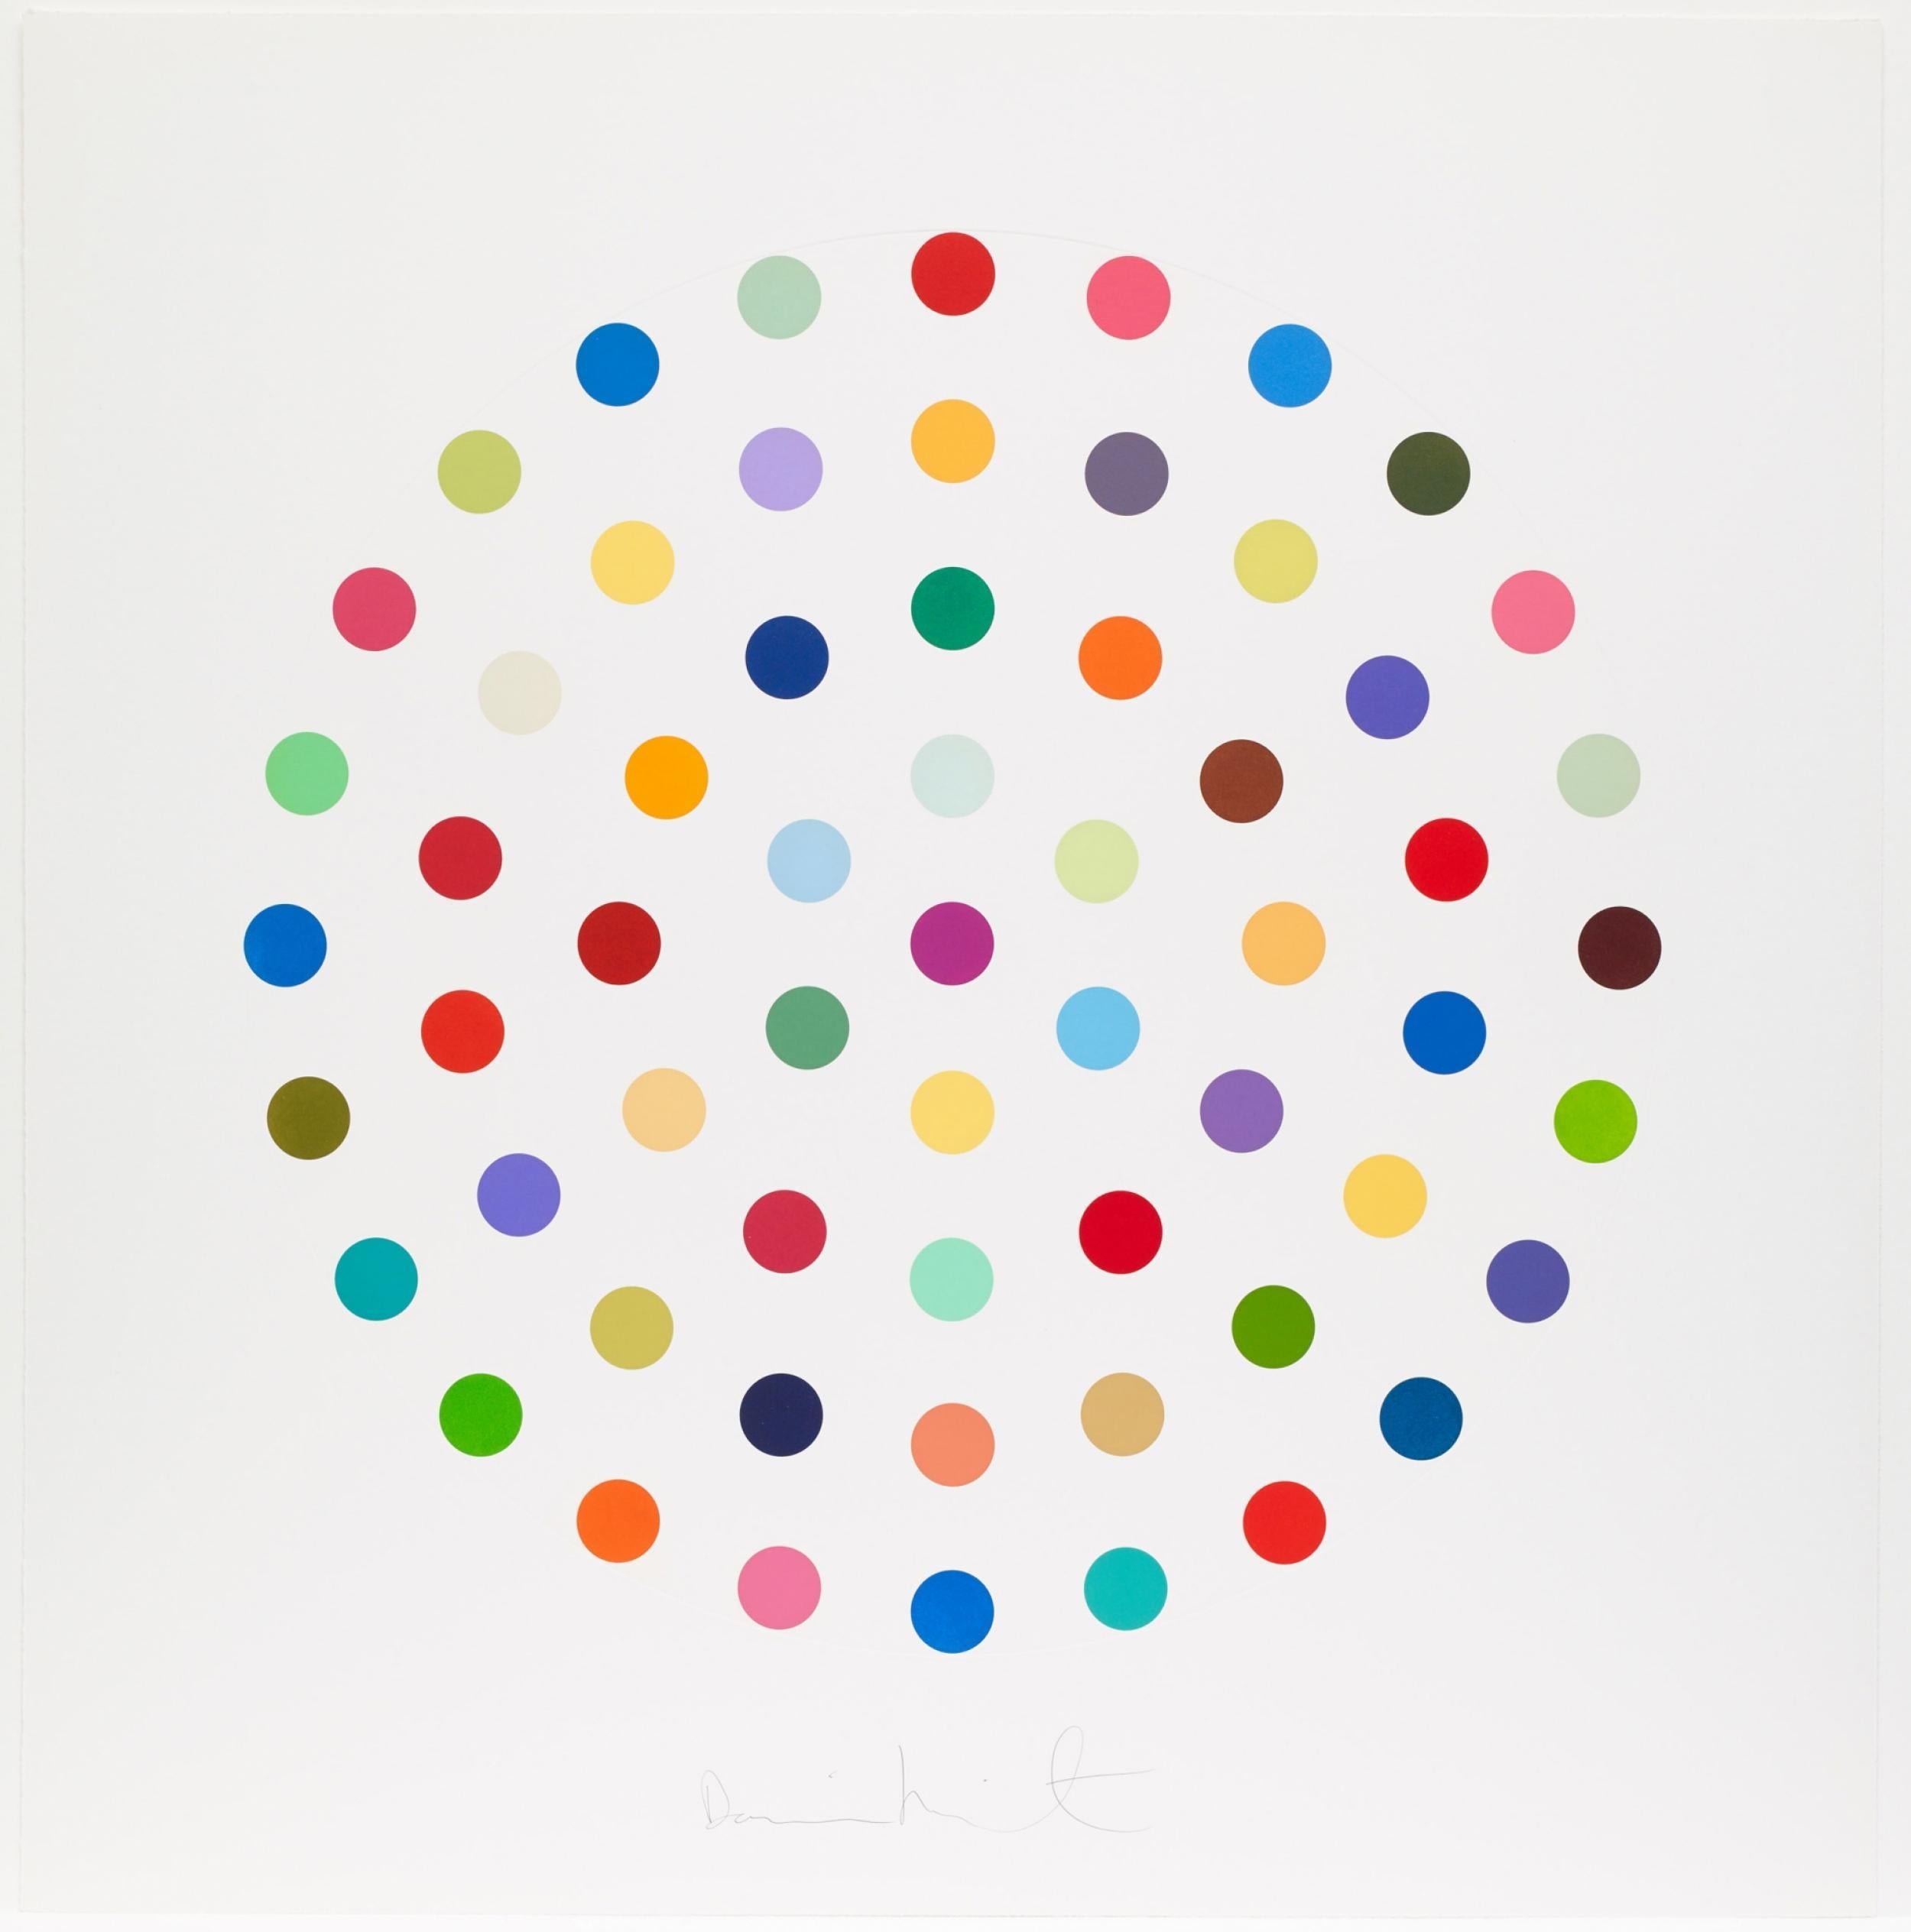 DAMIEN HIRST
Cineole, 2004
 
Etching with aquatint in colours, on Hahnemühle paper
Signed recto and numbered from the edition of 145 verso
Published by The Paragon Press, London
Diameter: 86.0 cm (33.8 in) 
Sheet: 115.3 x 112.7 cm (45.4  x 44.4